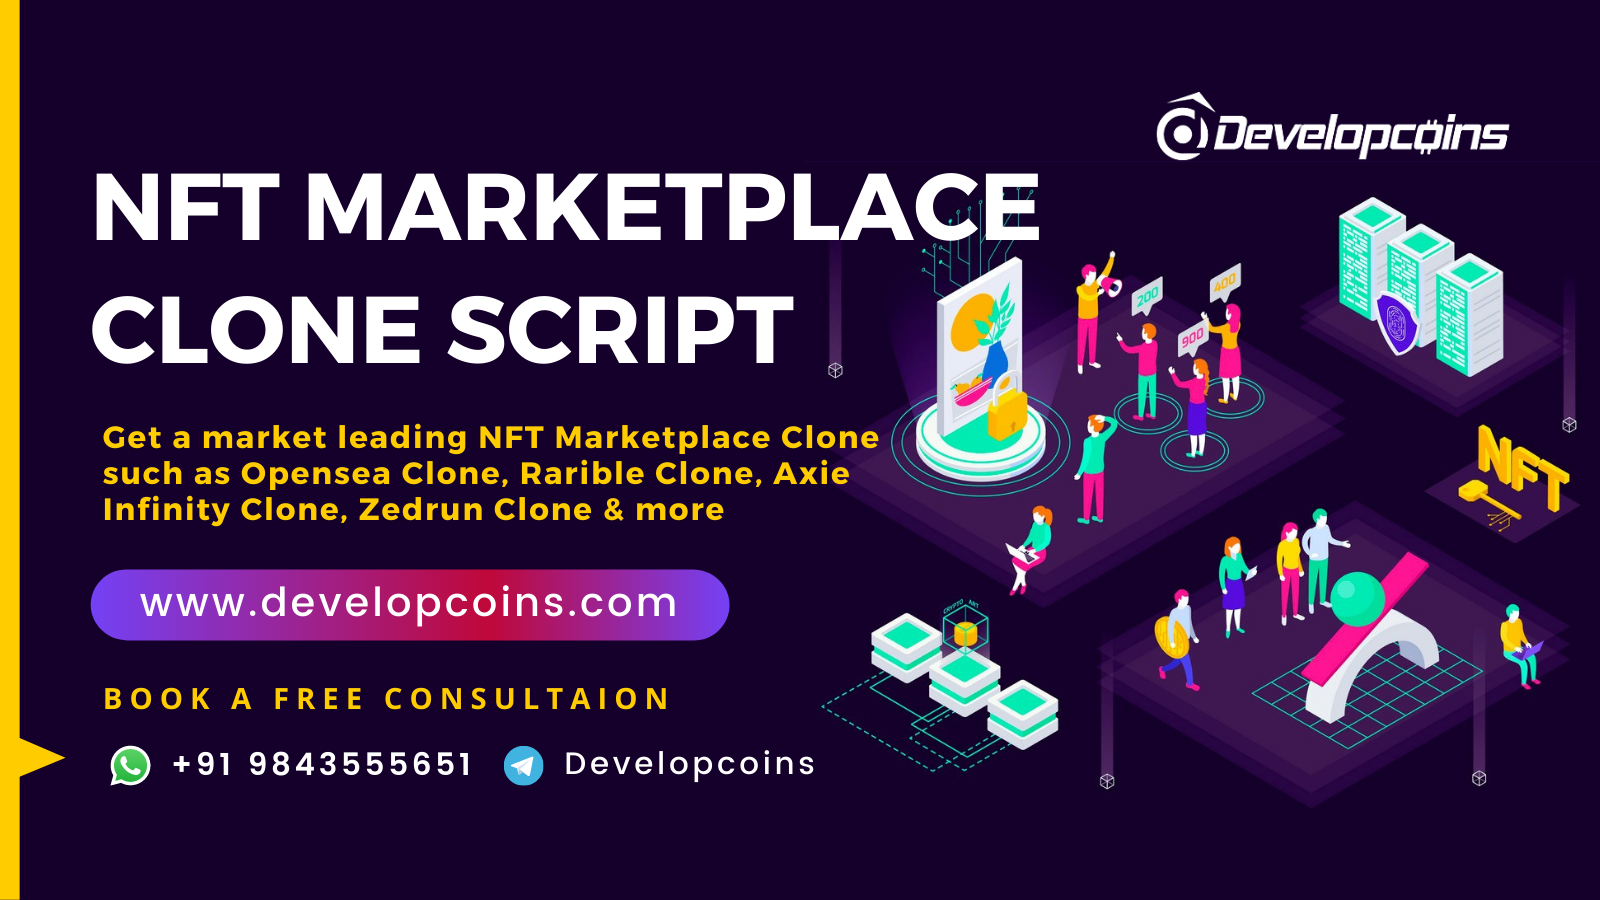 NFT Marketplace Clone Scripts for OpenSea, Rarible, Polkacity and More